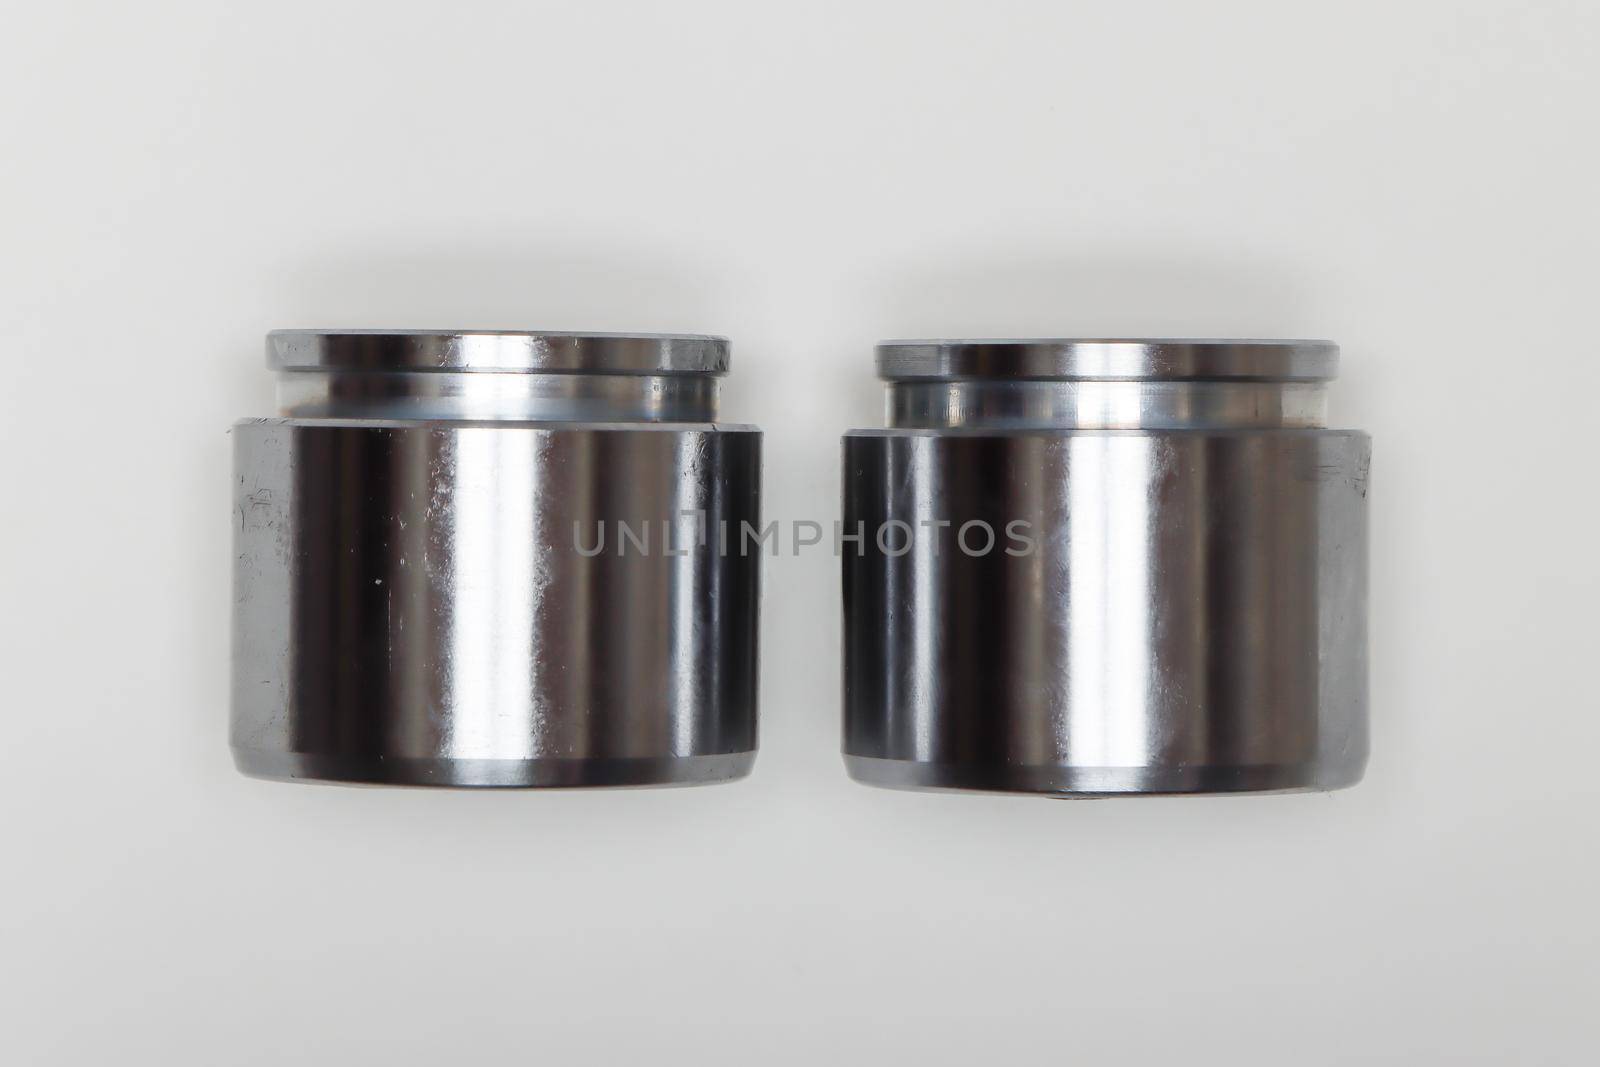 Two metal identical pistons, parts for car repair. A set of spare parts for servicing the braking system of a vehicle. Details on white background, copy space available.